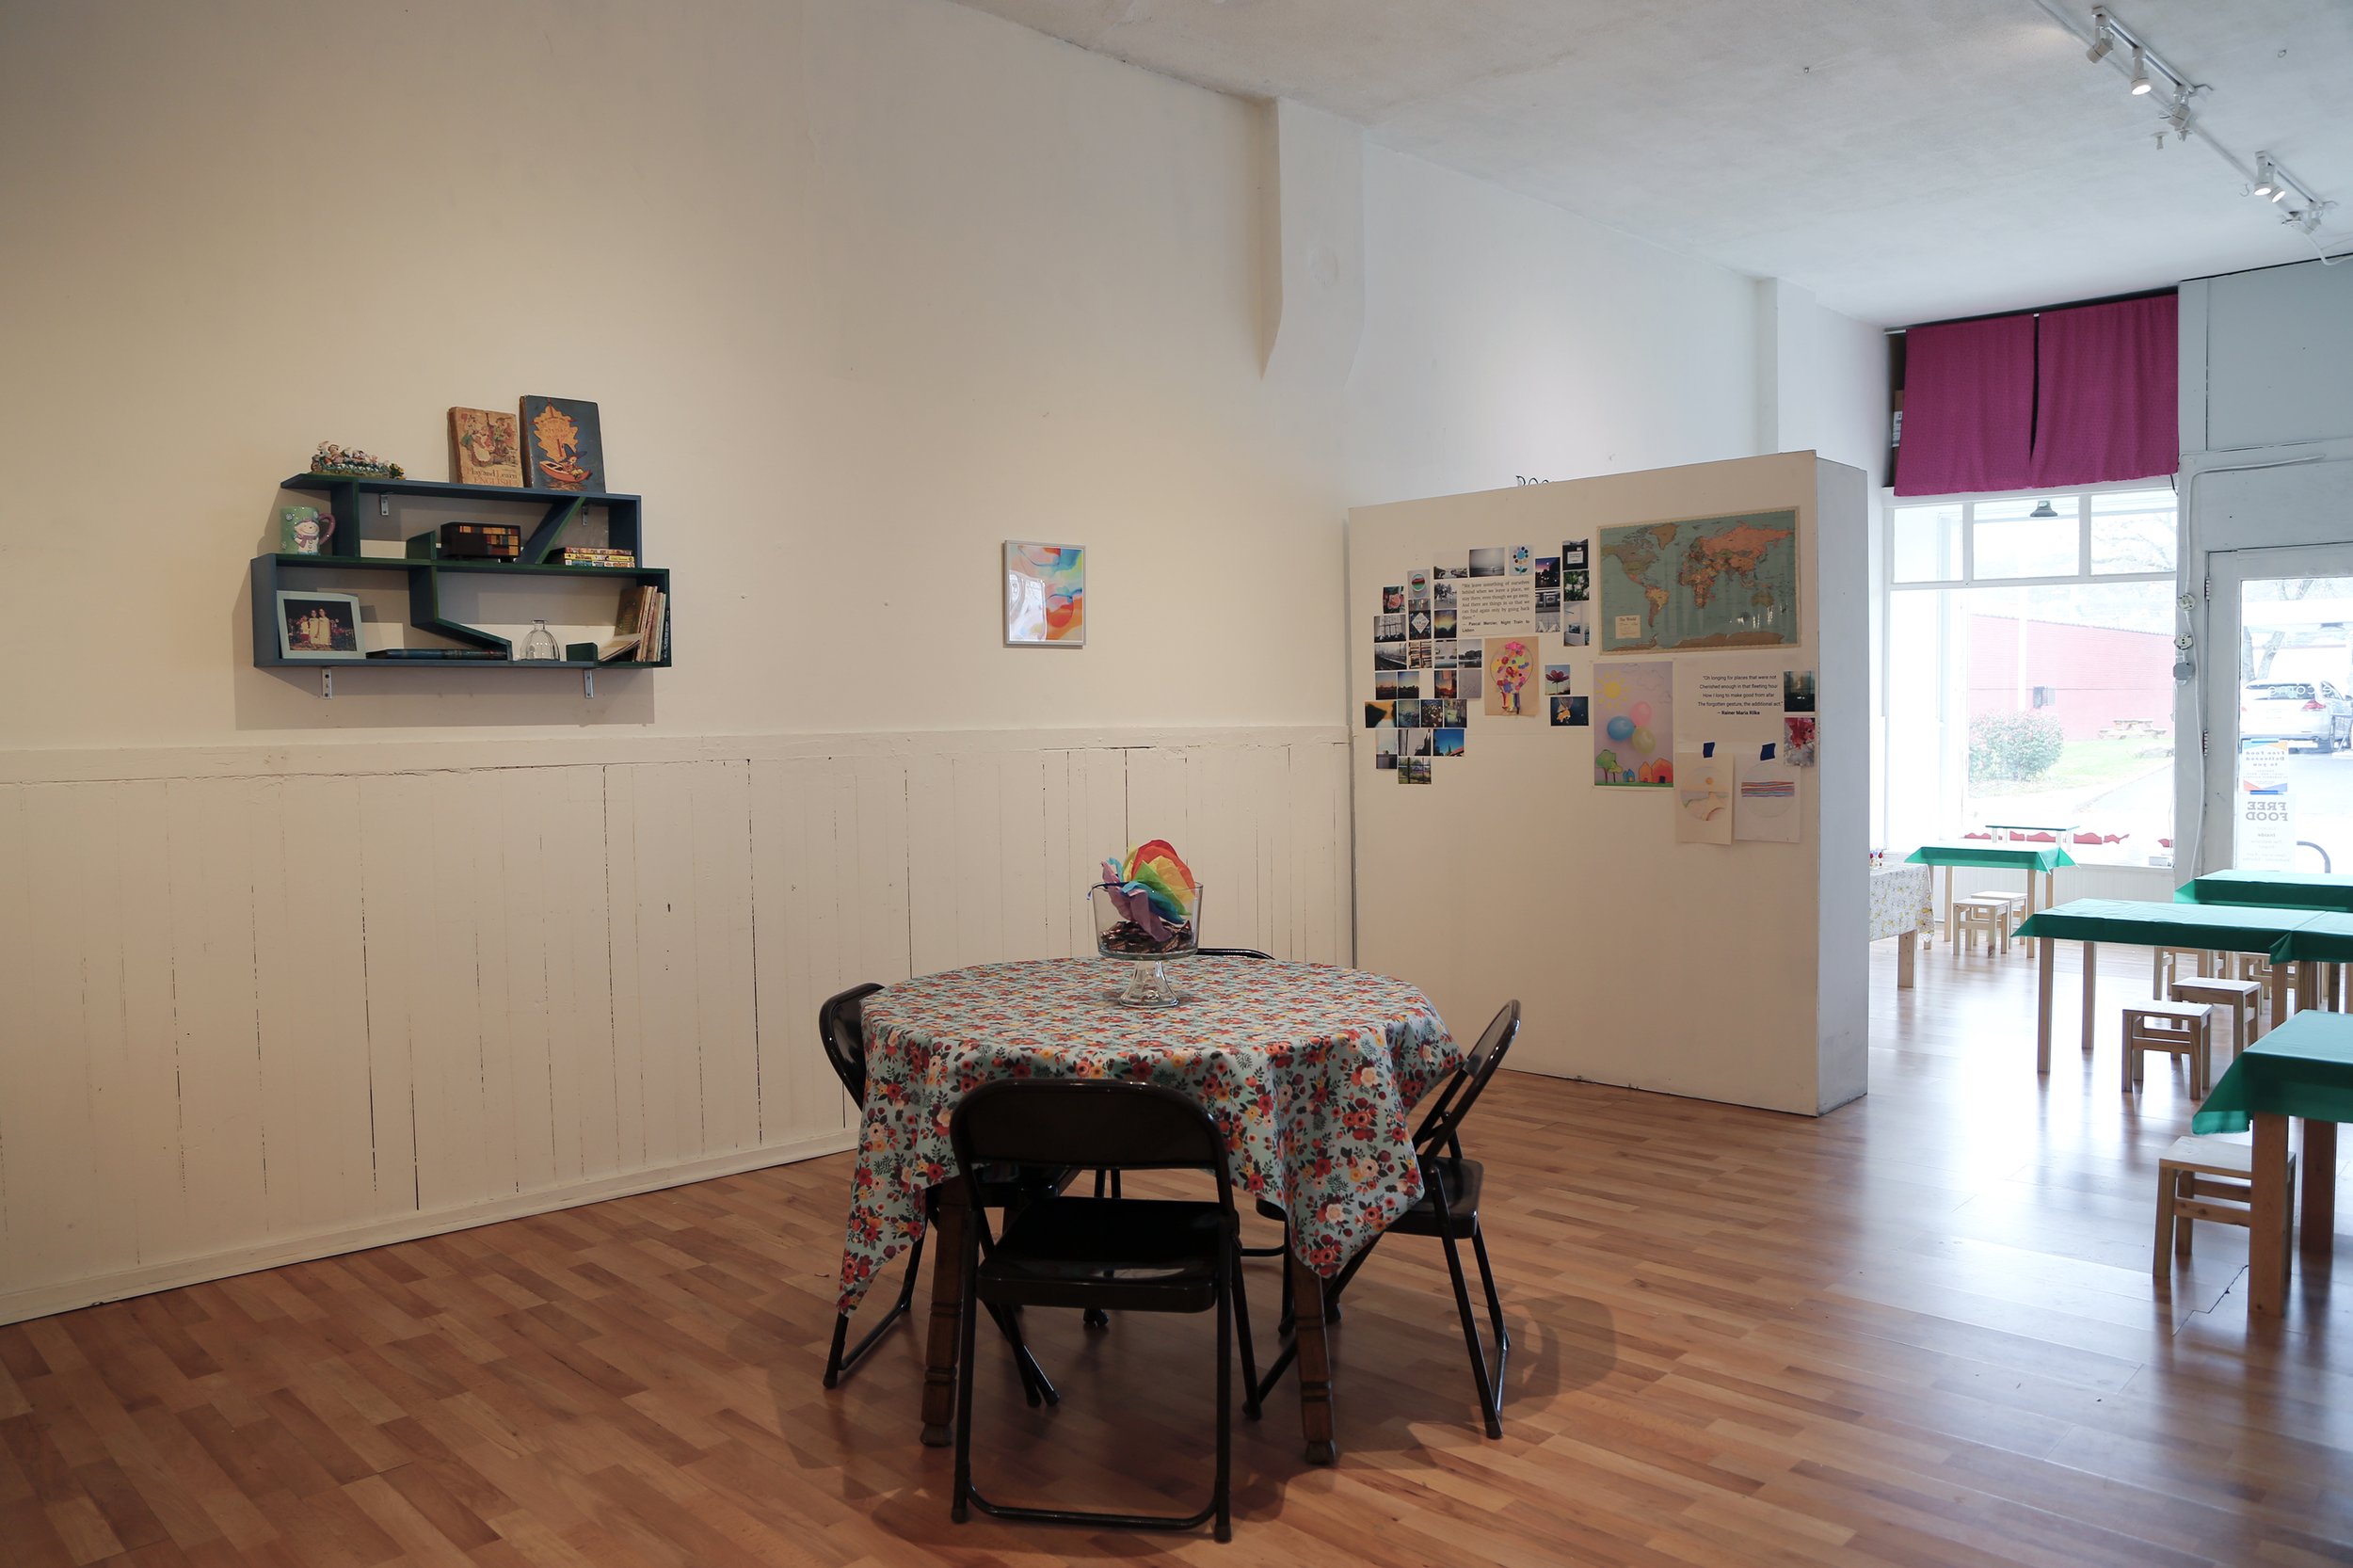 Home space installation view.jpg